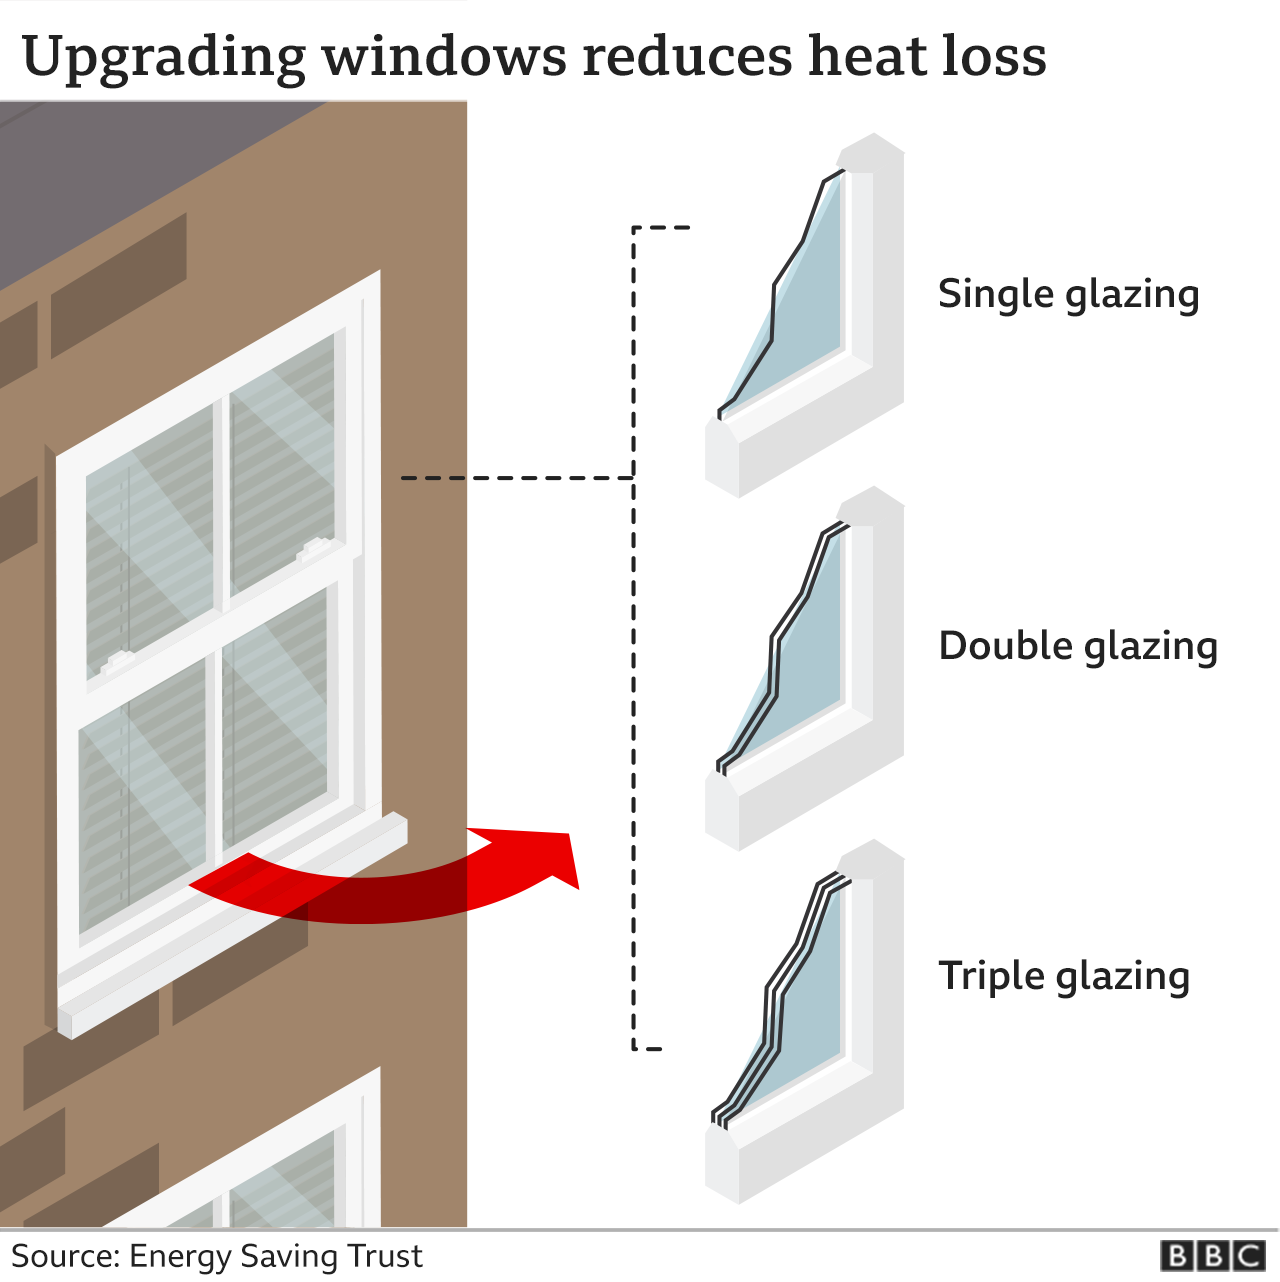 Graphic showing how upgrading windows works